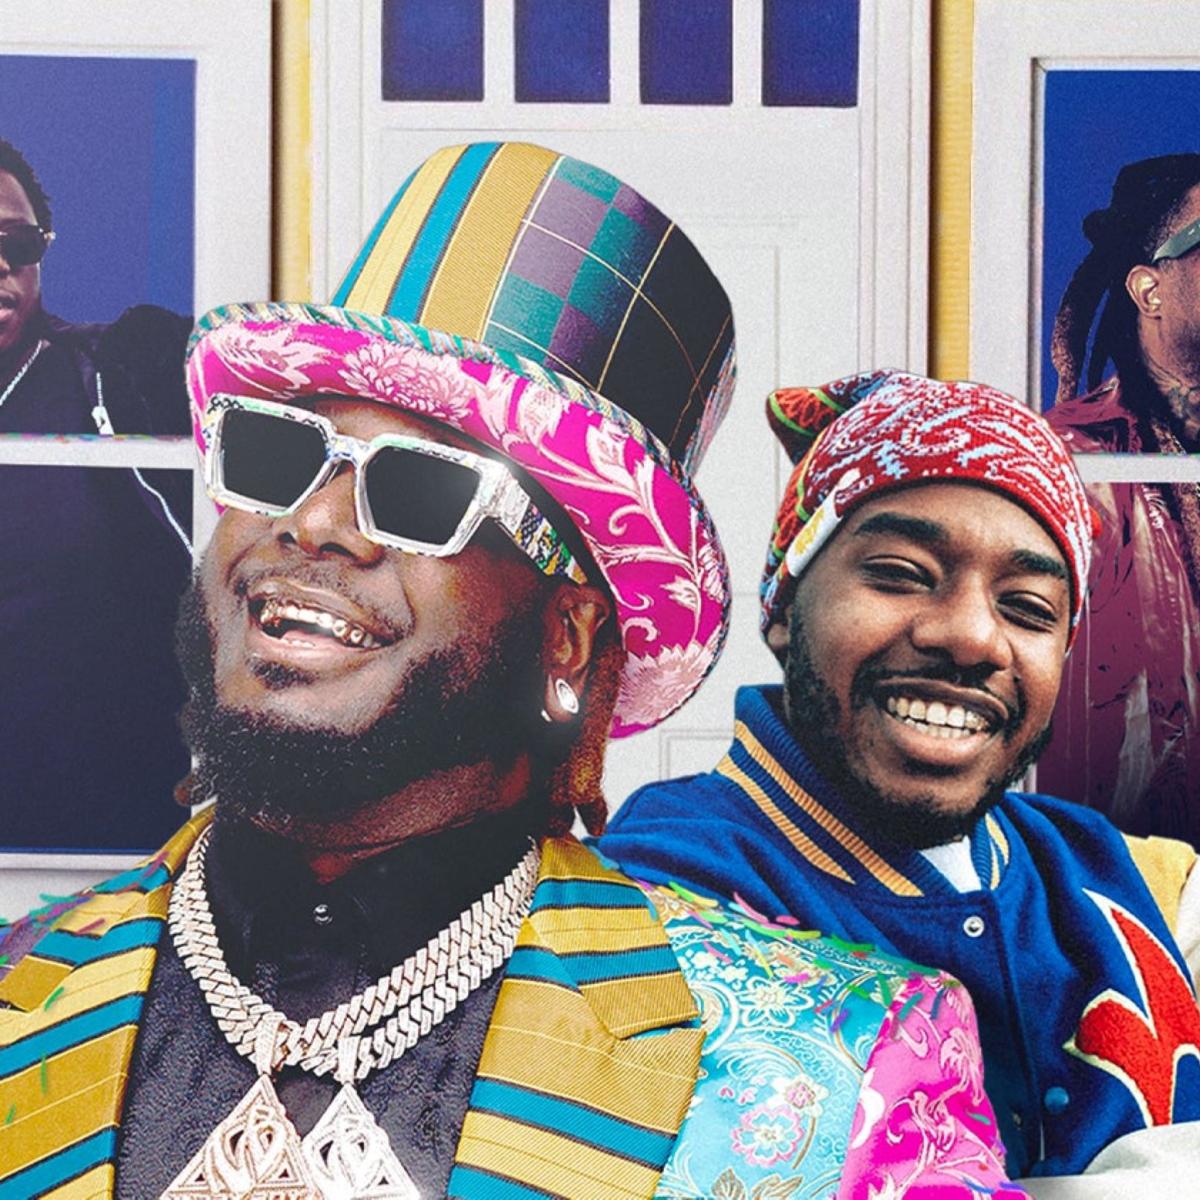 T-Pain Reaches Out To Collab With Musician He Found On Reddit | HipHopDX